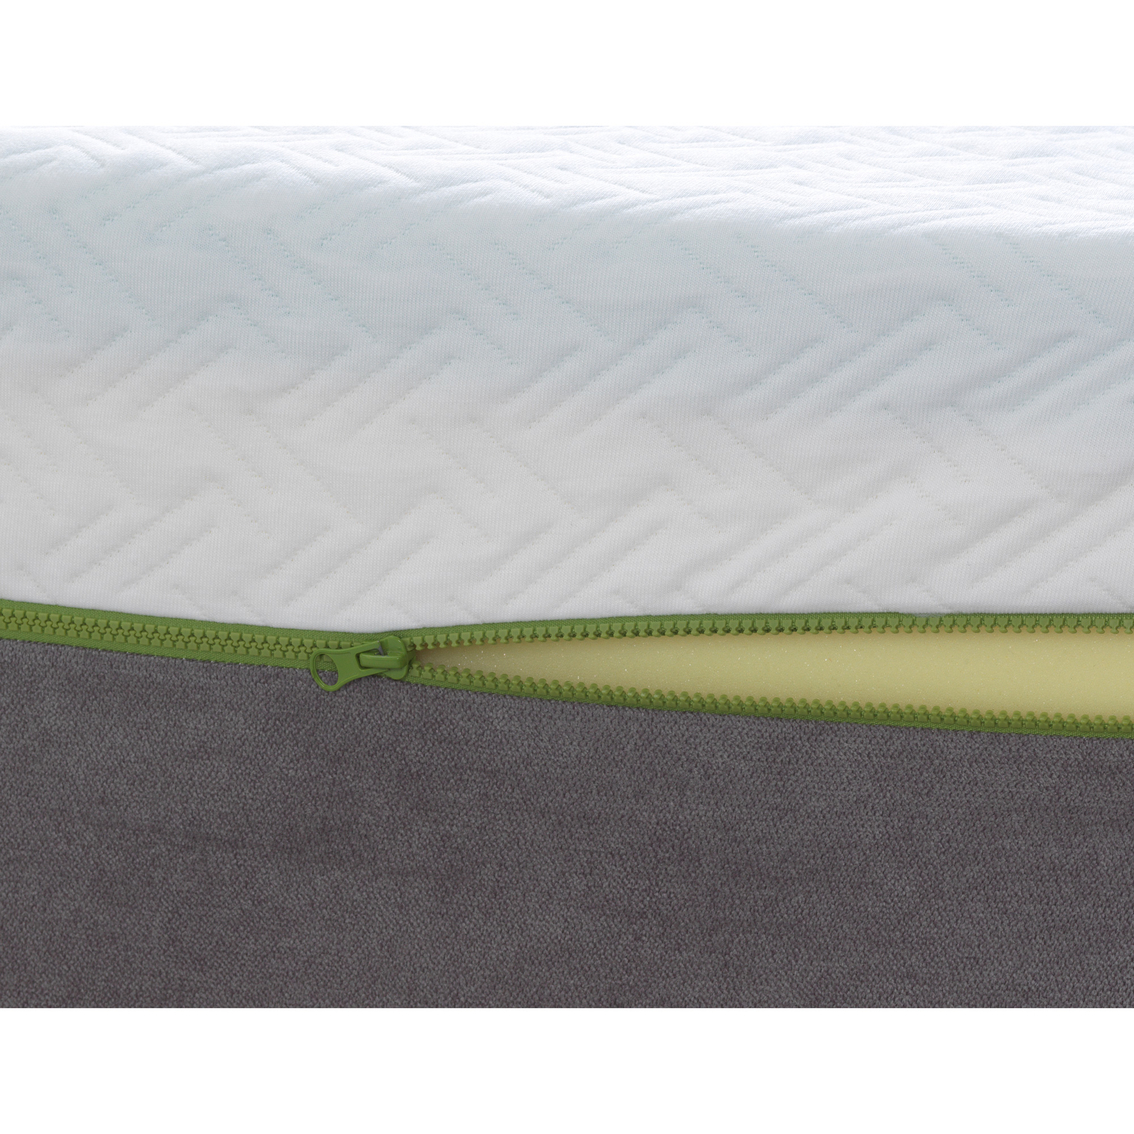 Motion Trend 12 in. Copper Infused Memory Foam Mattress with M4000 Adjustable Base - Image 6 of 6